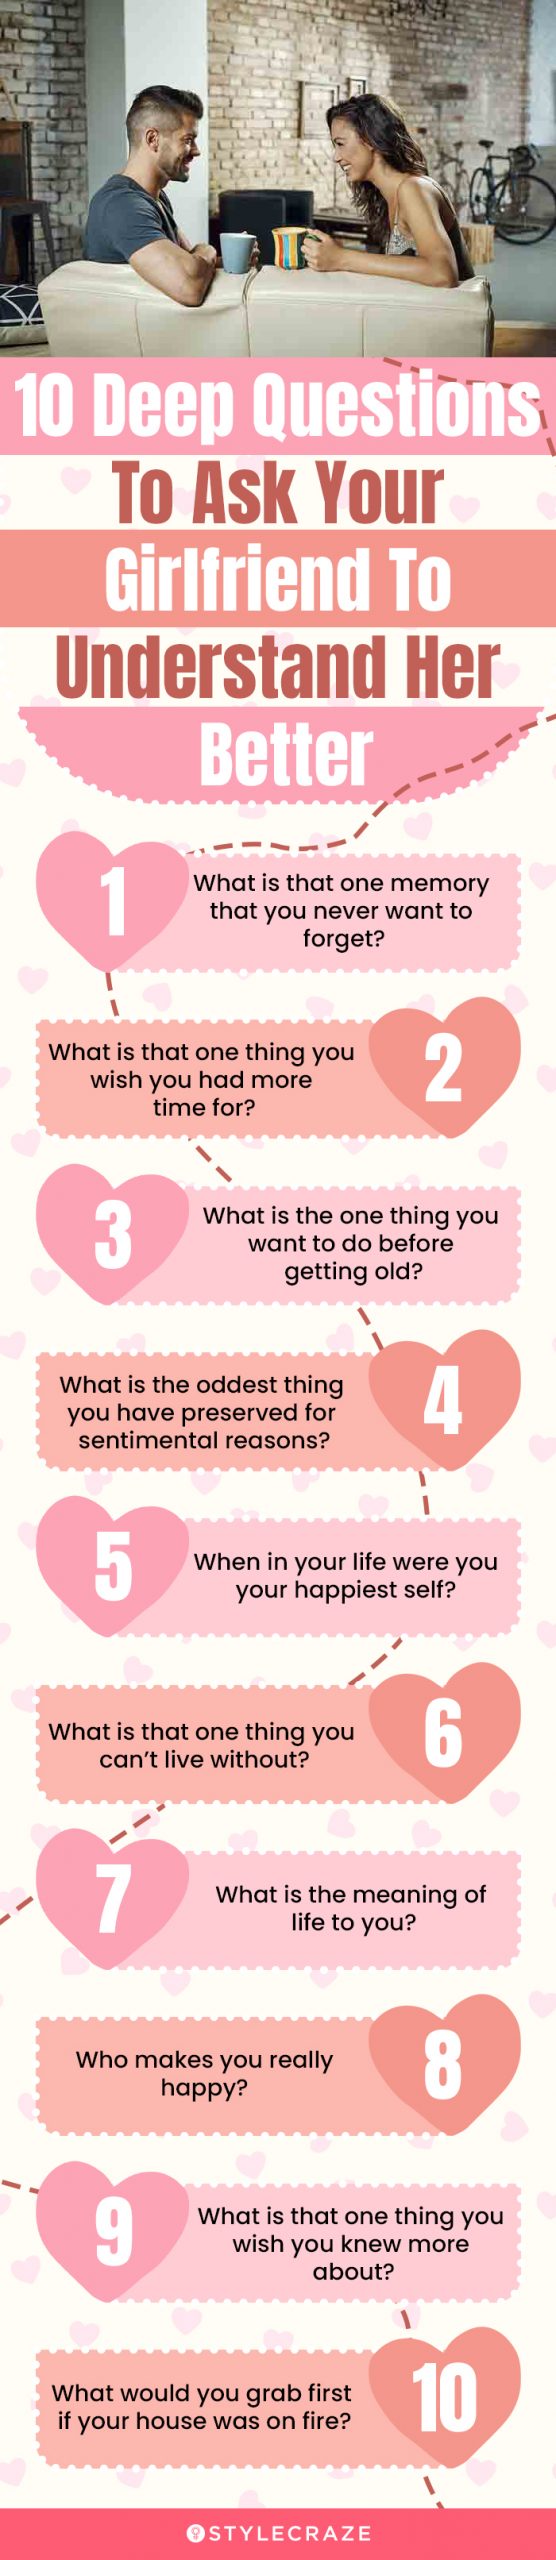 10 deep questions to ask your girlfriend to understand her better (infographic)